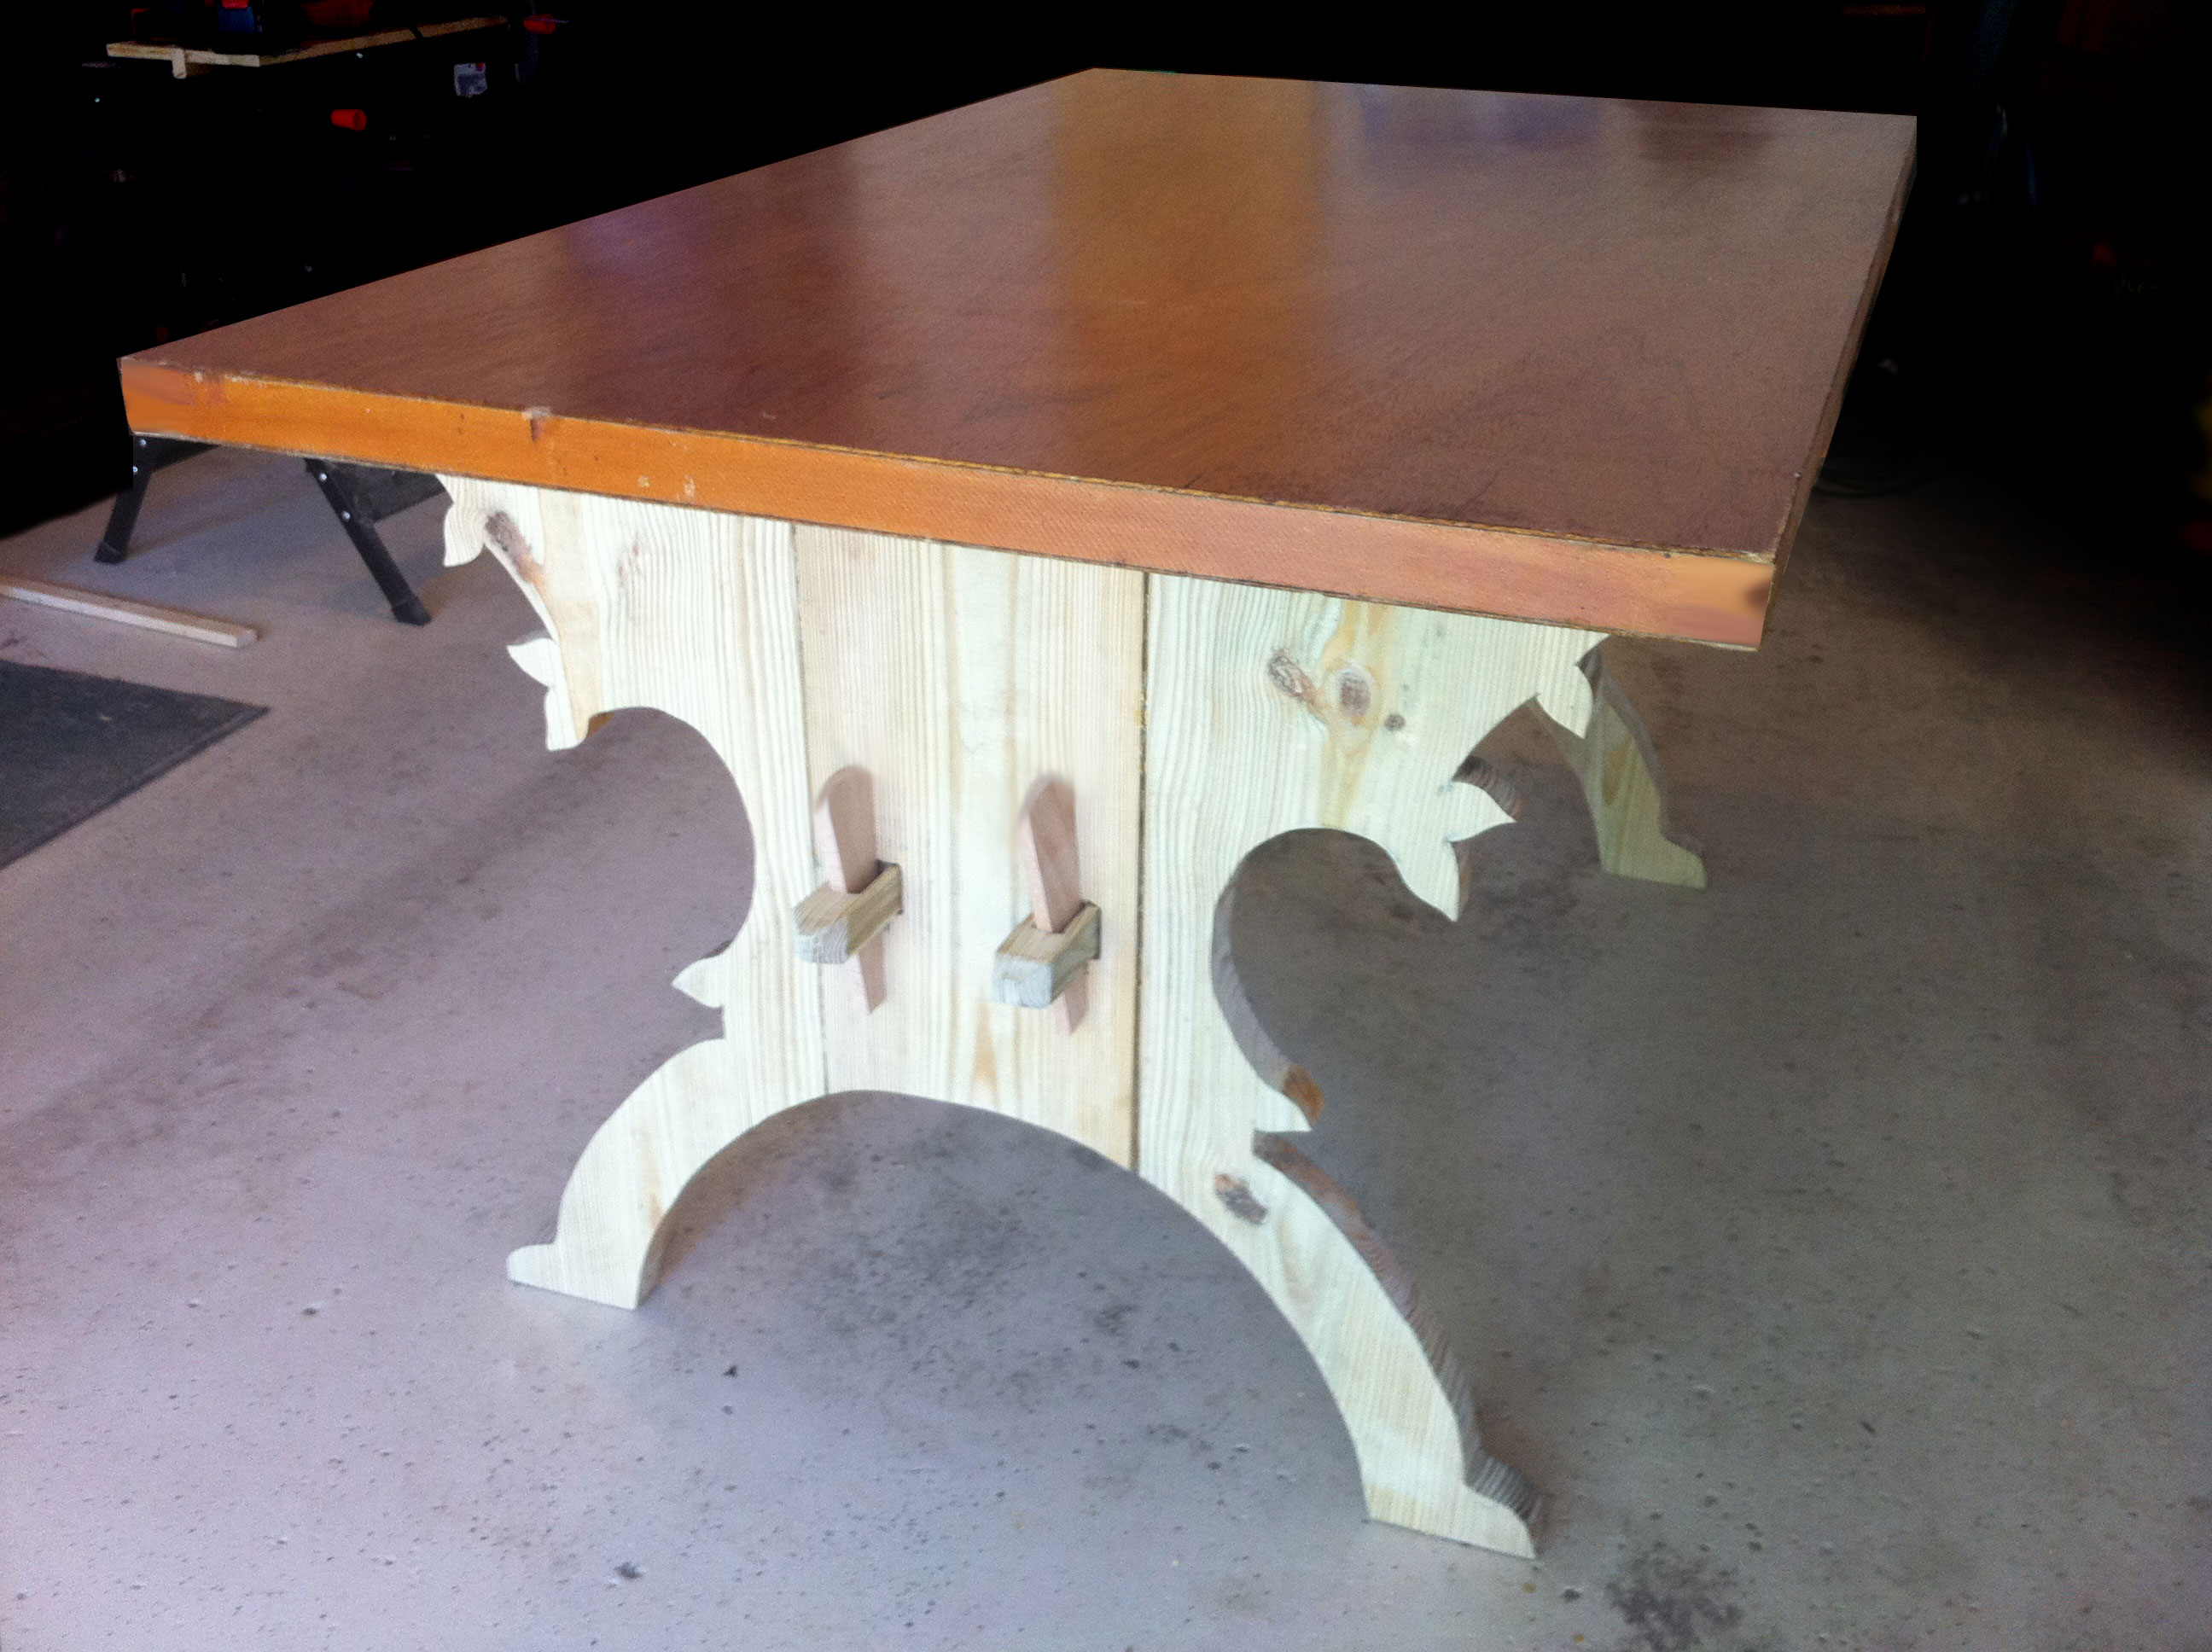 A Trestle Table For Under 35 How I Built A 15th Century Style